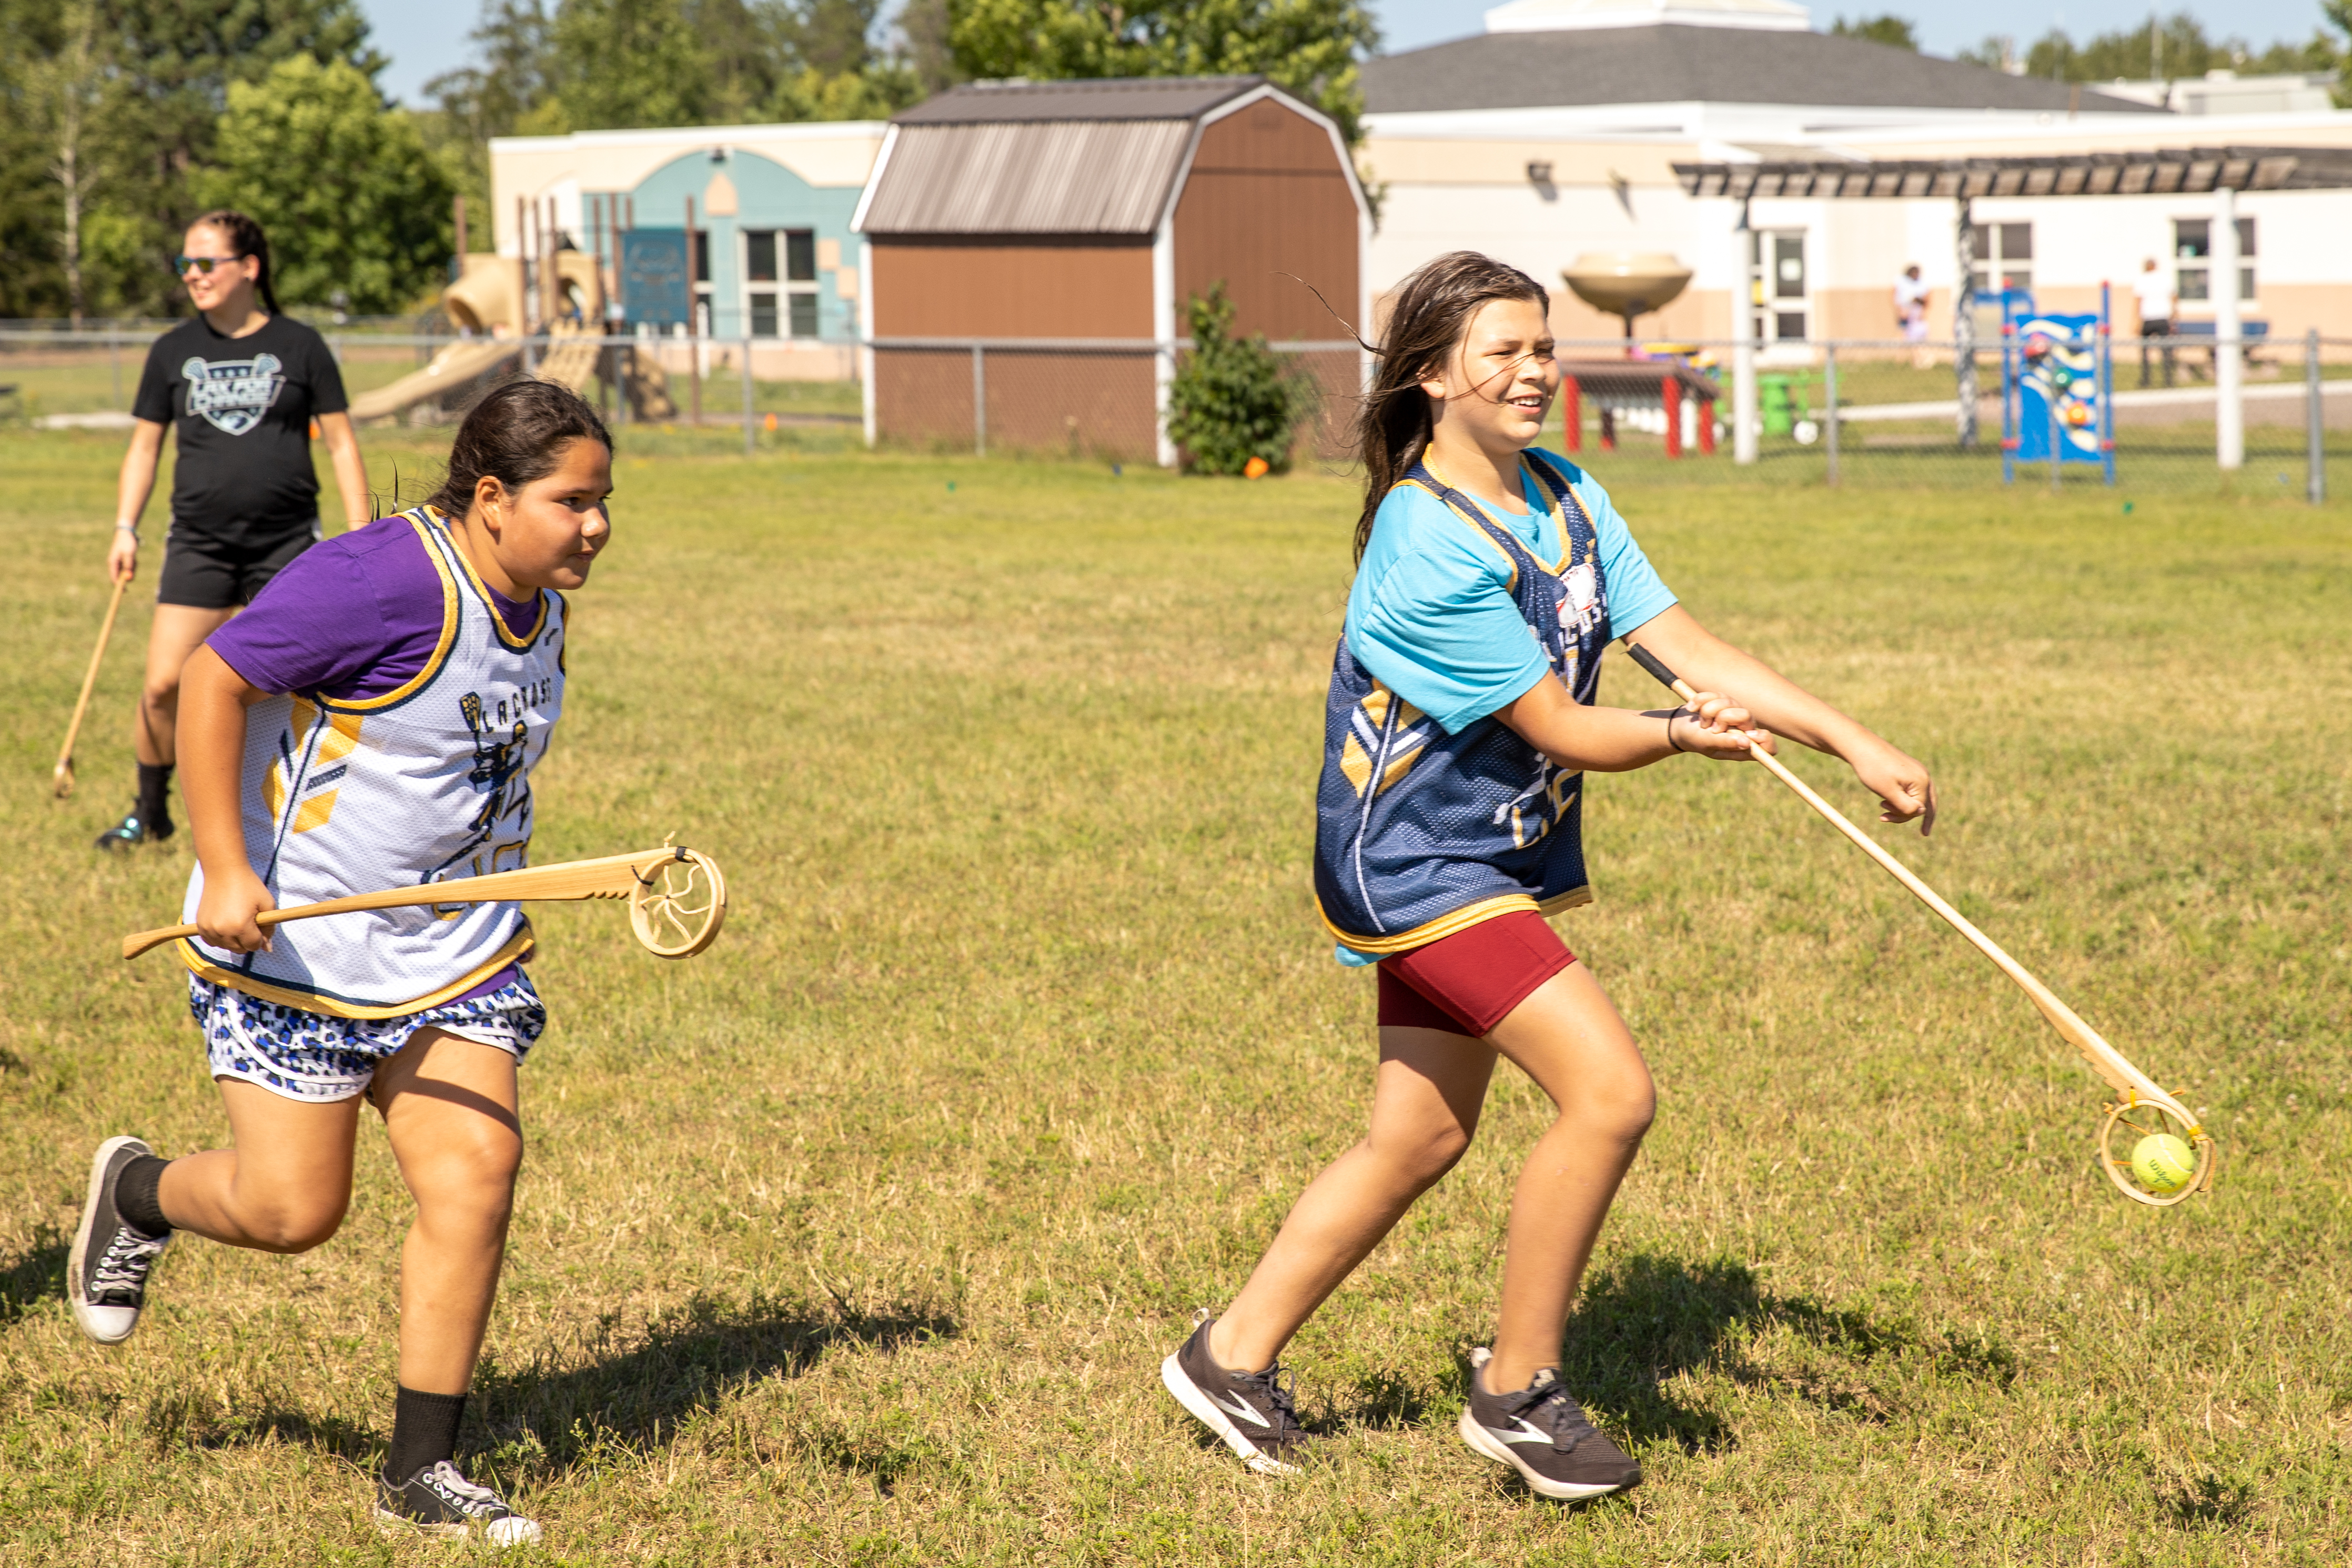 Two girls playing lacrosse in a field.